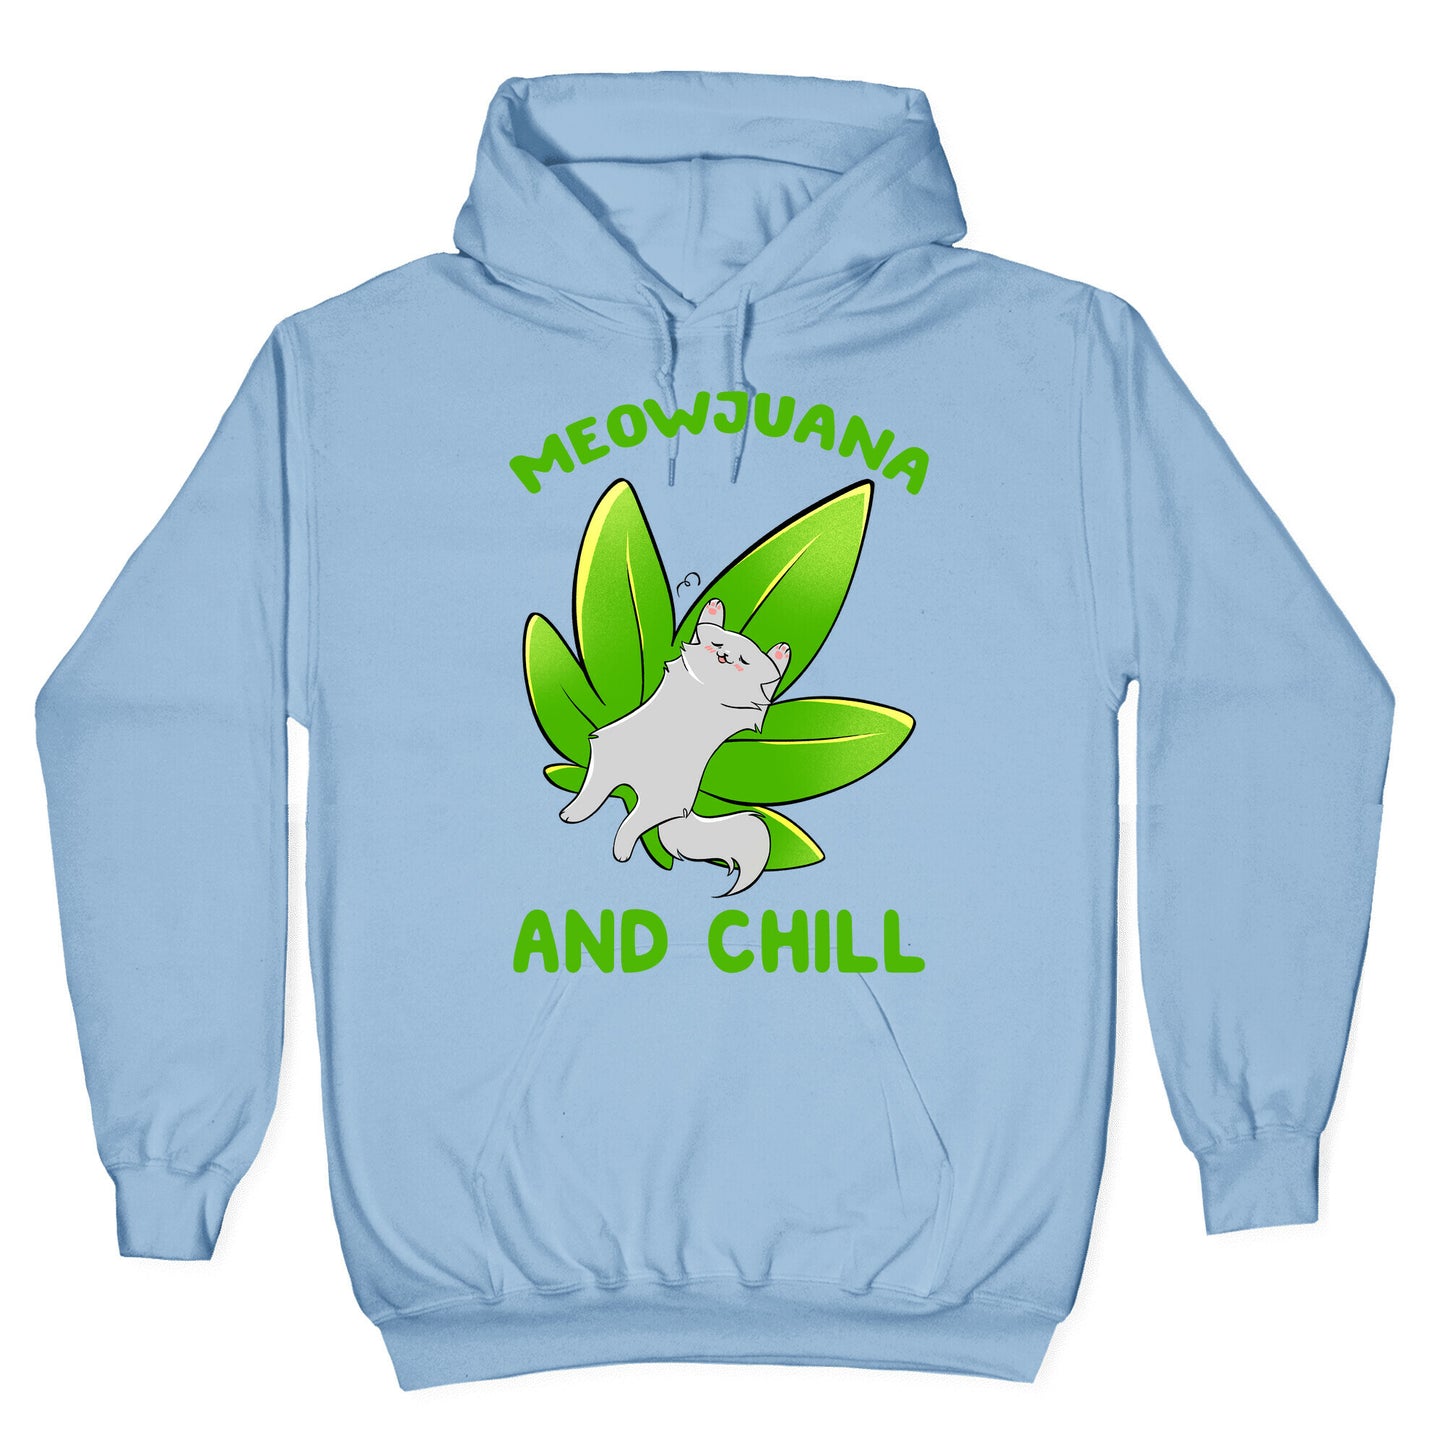 Meowjuana And Chill Hoodie